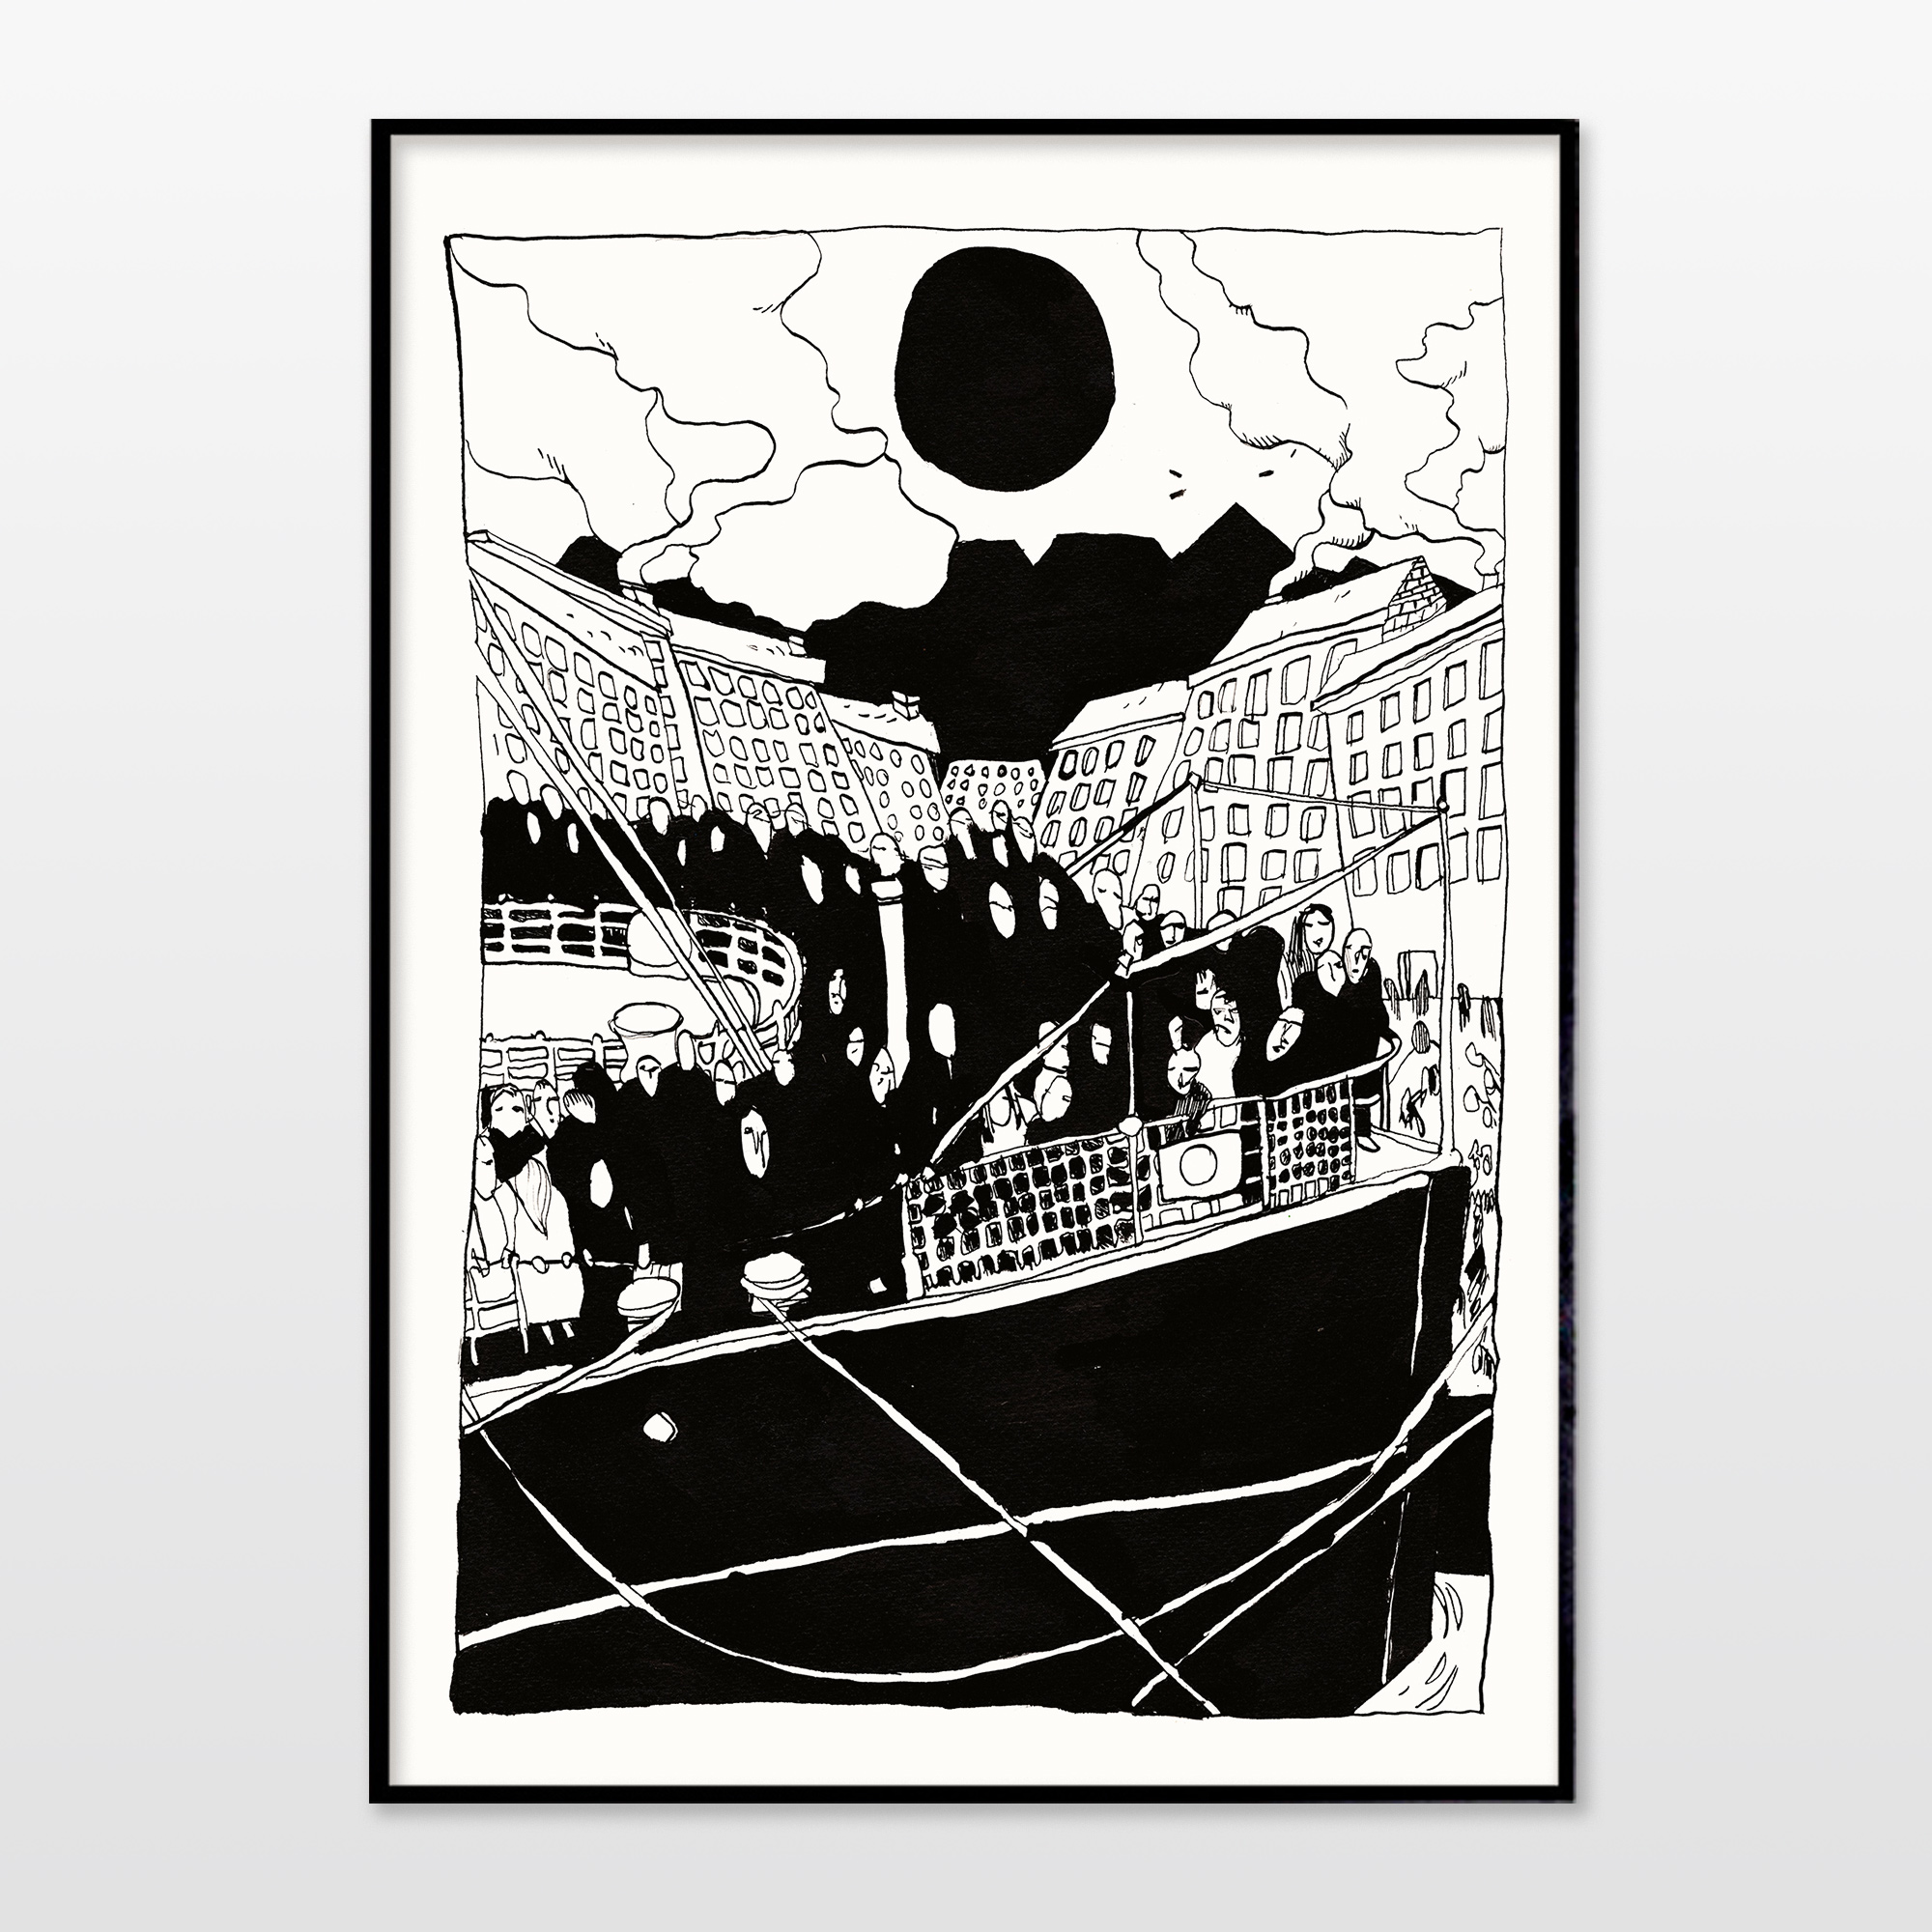 art-prints, giclee, figurative, illustrative, cartoons, oceans, sailing, transportation, black, white, ink, paper, black-and-white, boats, decorative, design, interior, modern, modern-art, posters, prints, sea, travel, Buy original high quality art. Paintings, drawings, limited edition prints & posters by talented artists.